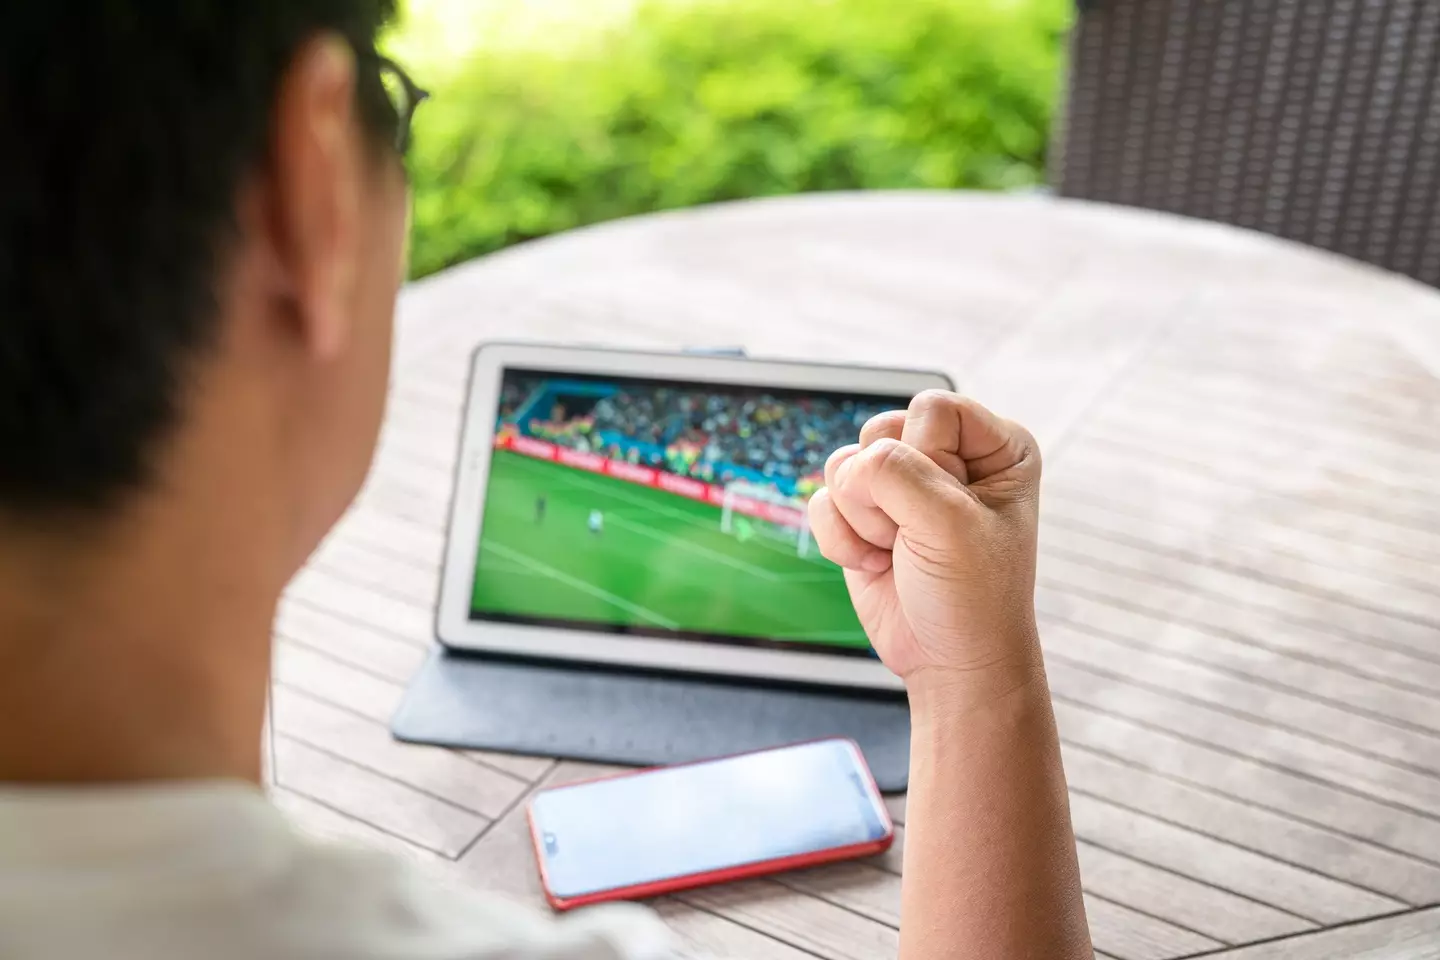 Streaming sport is illegal if you do it via IPTV.